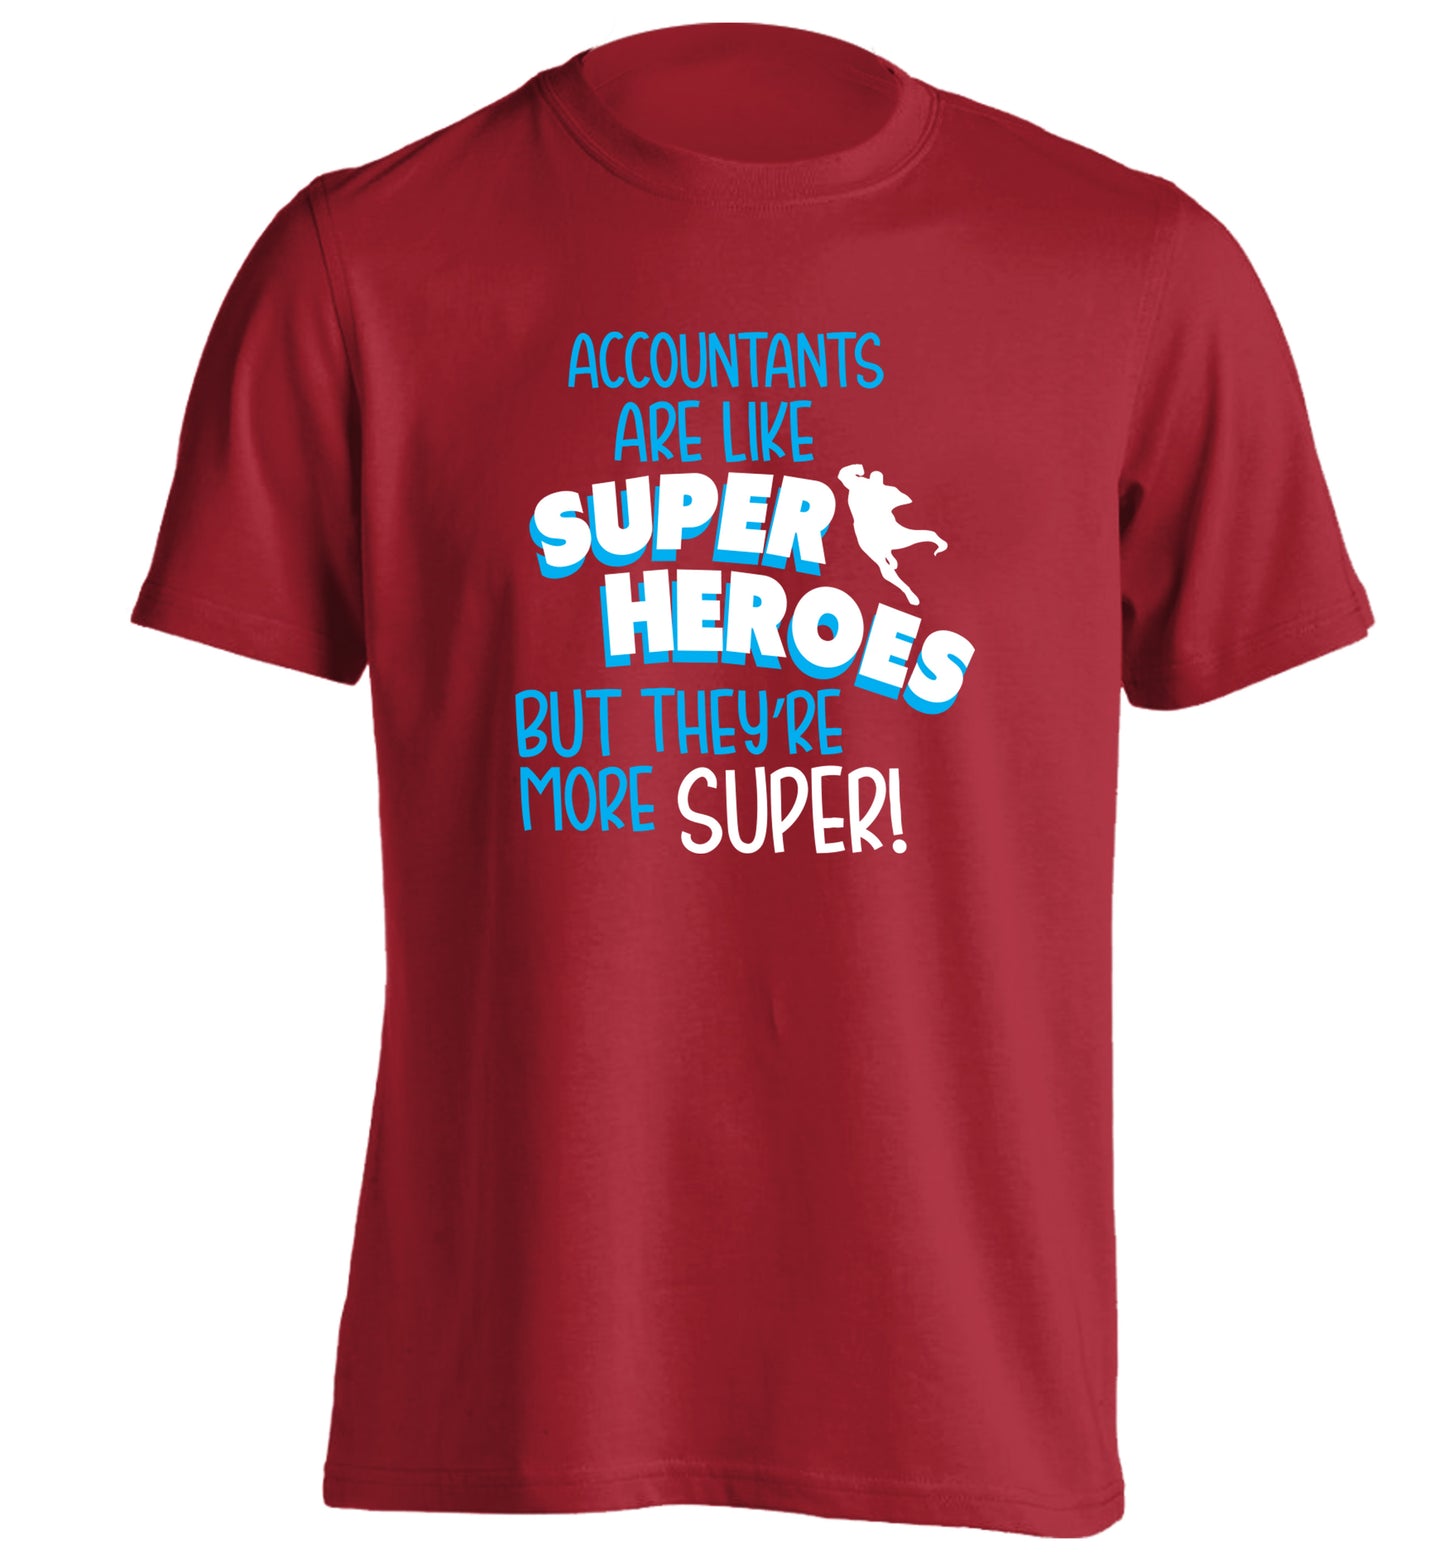 Accountants are like superheroes but they're more super adults unisex red Tshirt 2XL